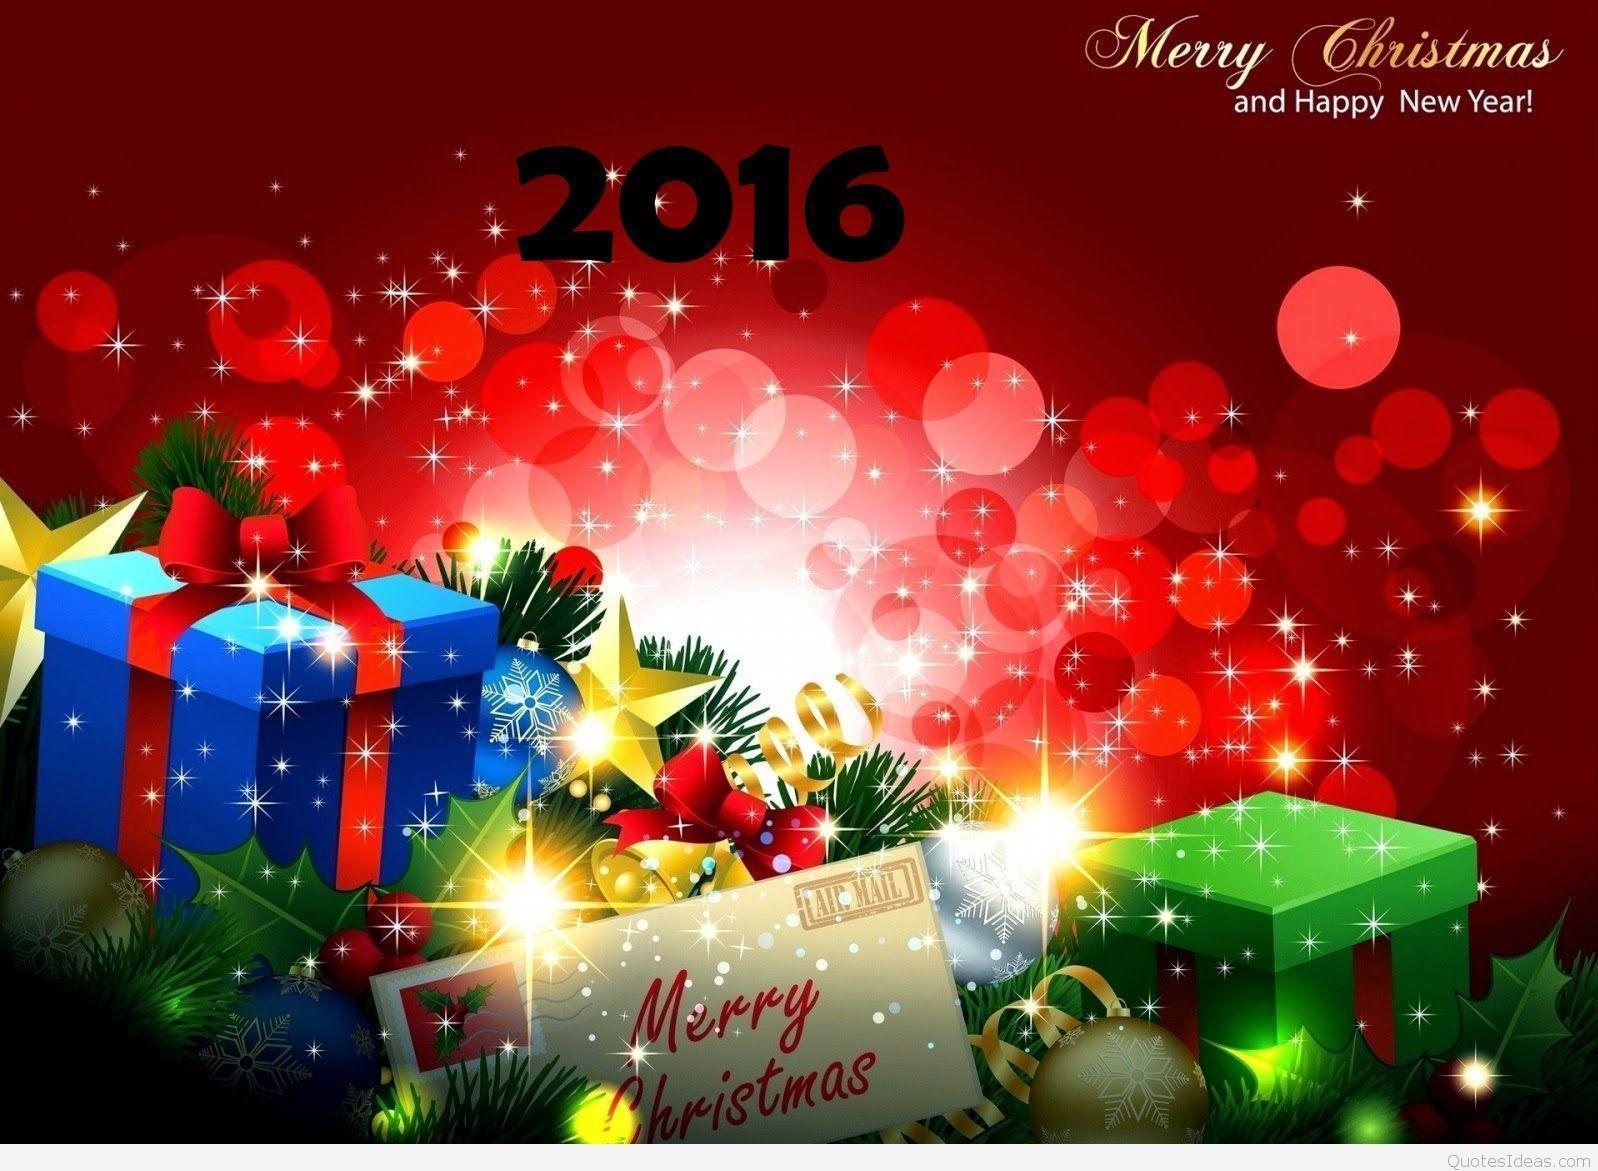 Merry Christmas 2016 Wallpapers - Wallpaper Cave